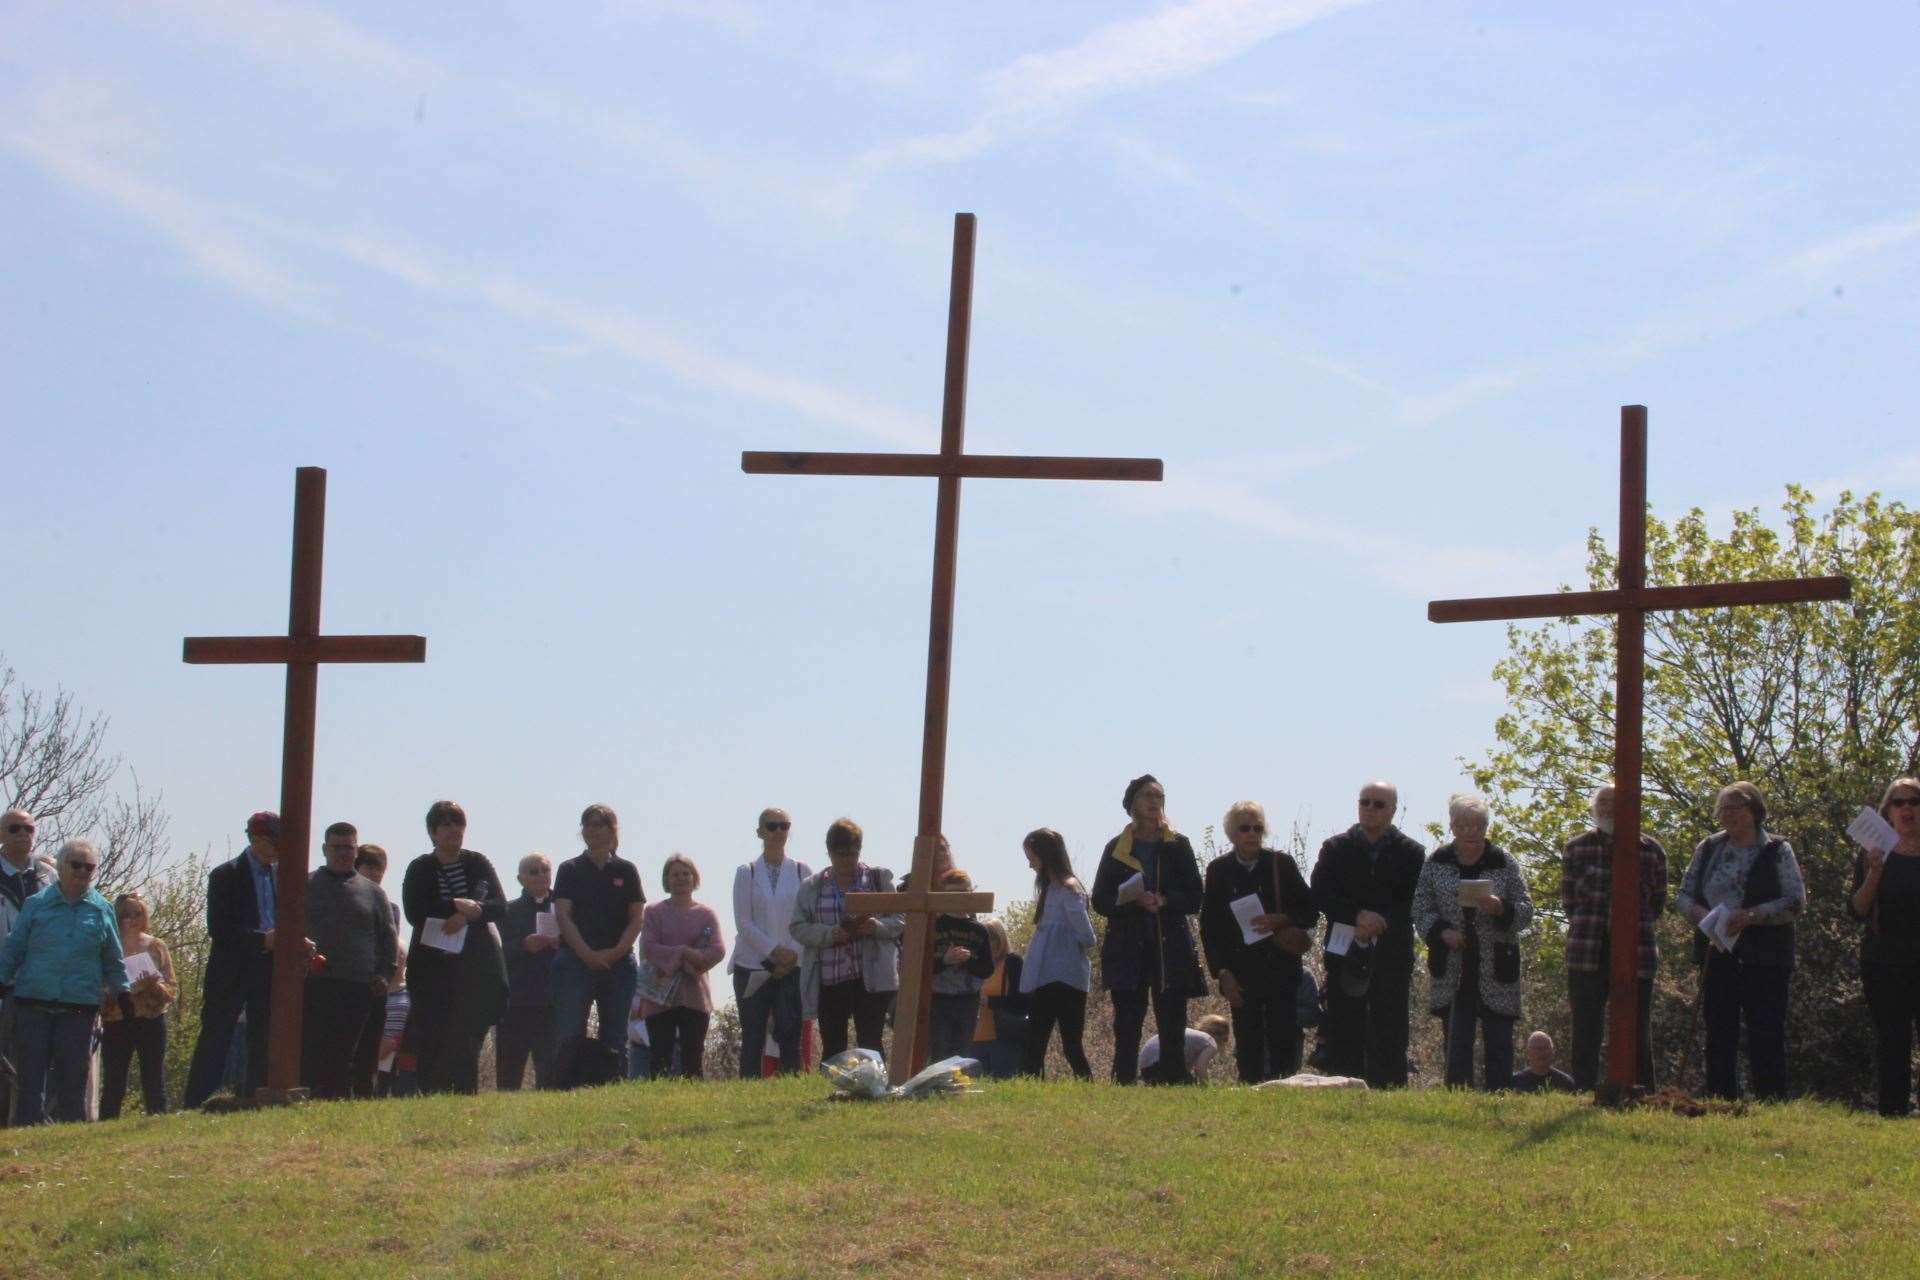 Easter at Bunny Bank at The Glen, Minster, Sheppey, in 2019 with the traditional three wooden crosses